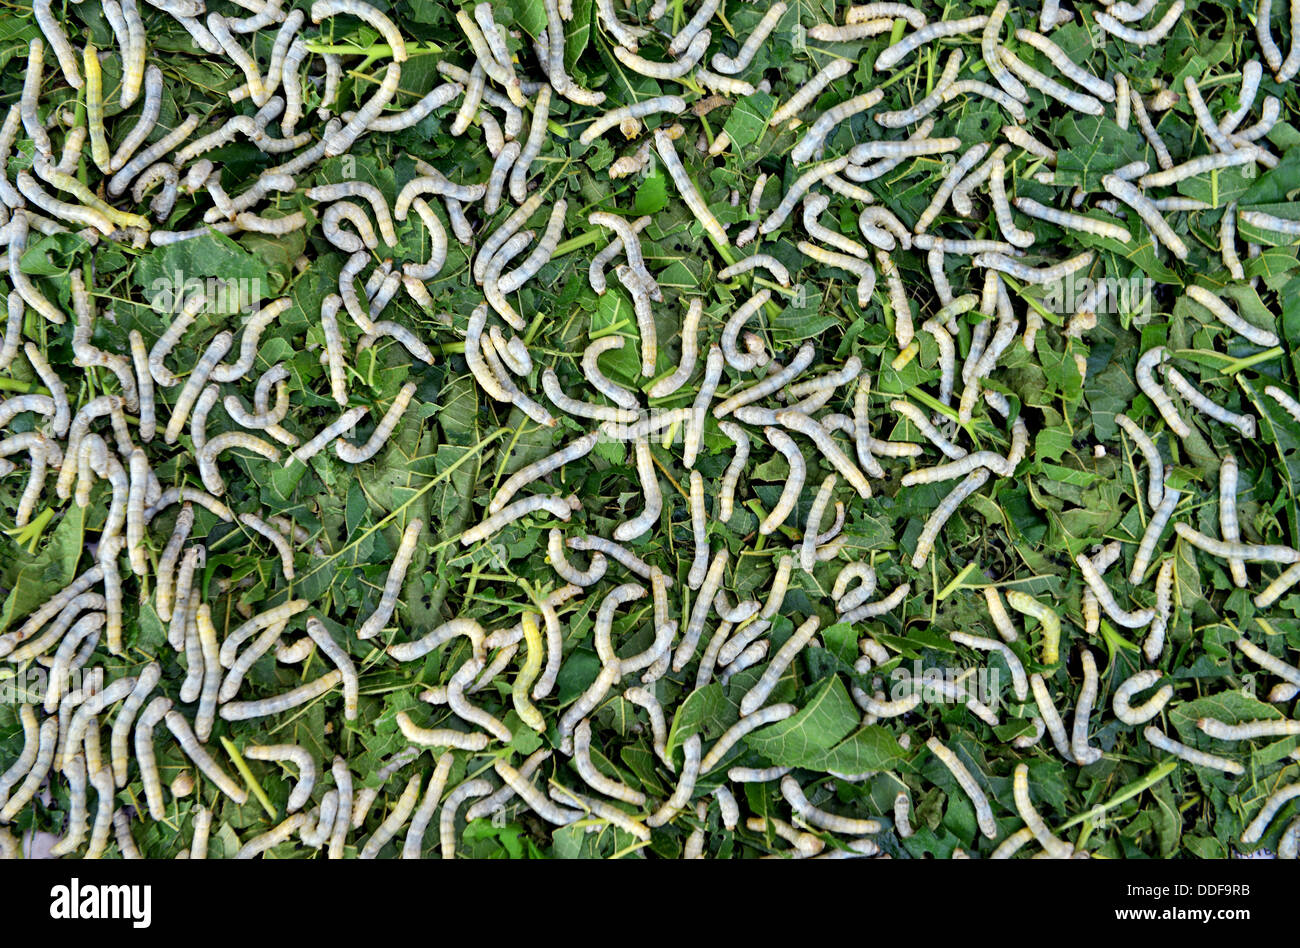 Silkworm, Silkworms, Silk worms, Silk worm caterpillars, close up of silk worms Stock Photo